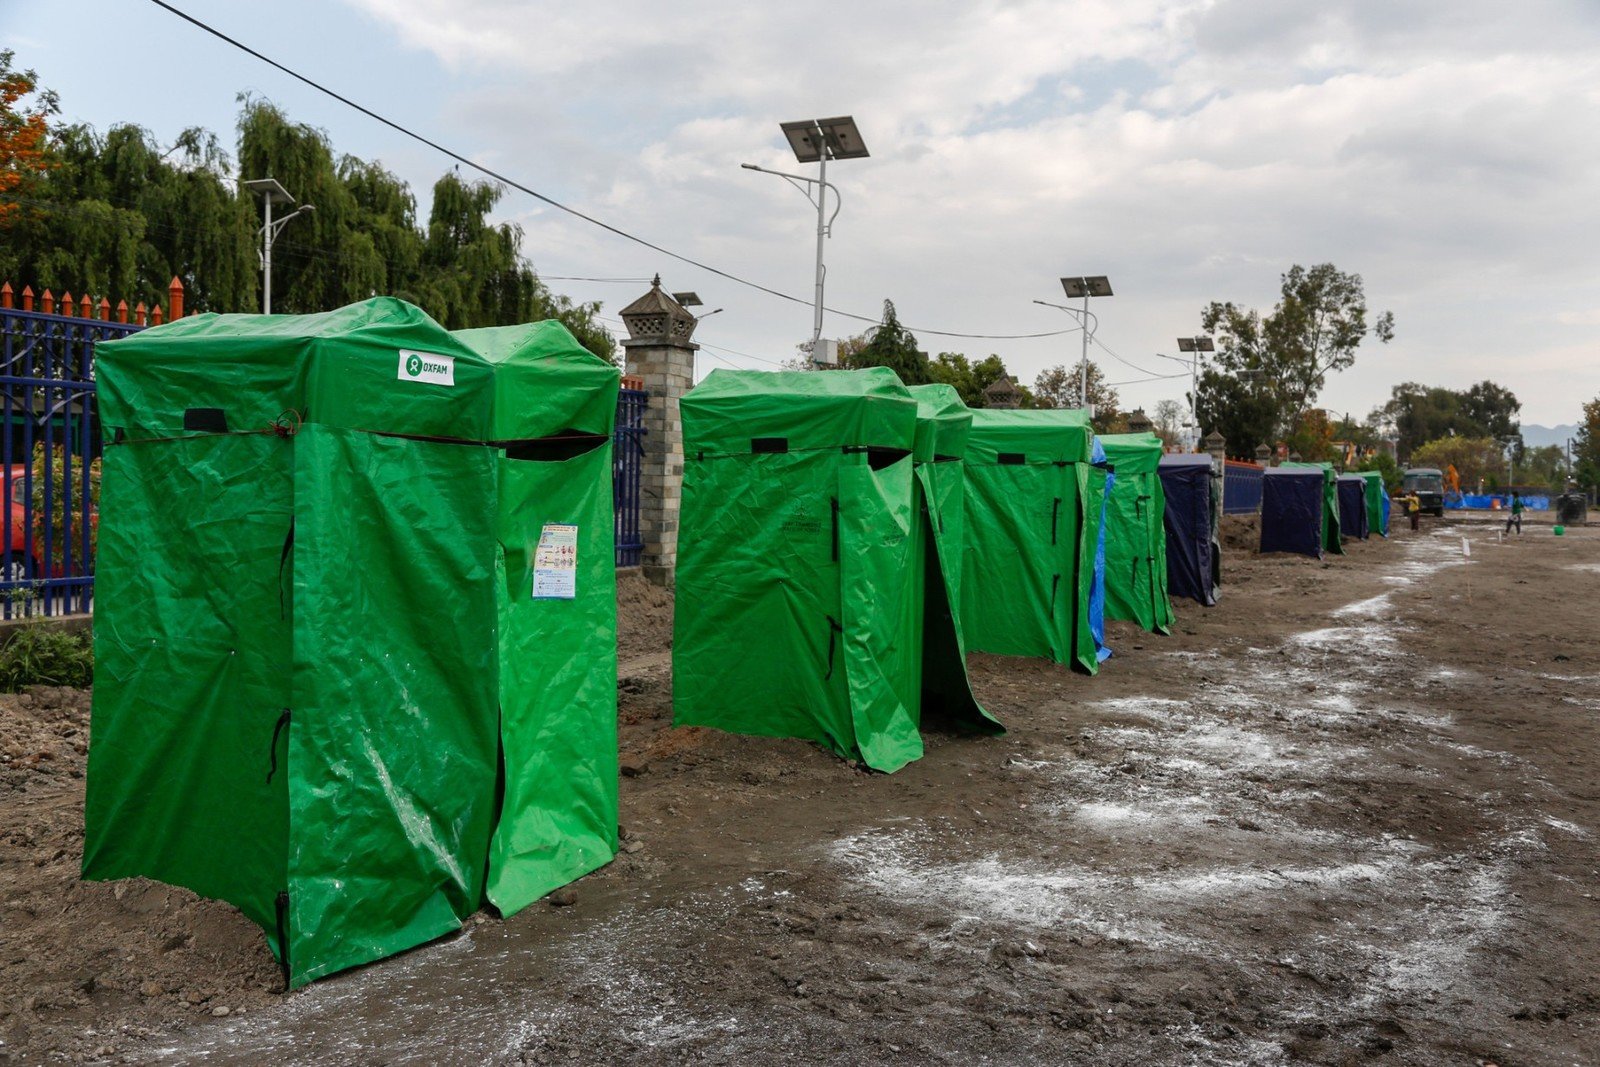 PR4: As hygiene conditions have worsened after Saturday's massive earthquake, Oxfam is constructing toilets to prevent the outbreak of disease. (Aubrey Wade / Oxfam)